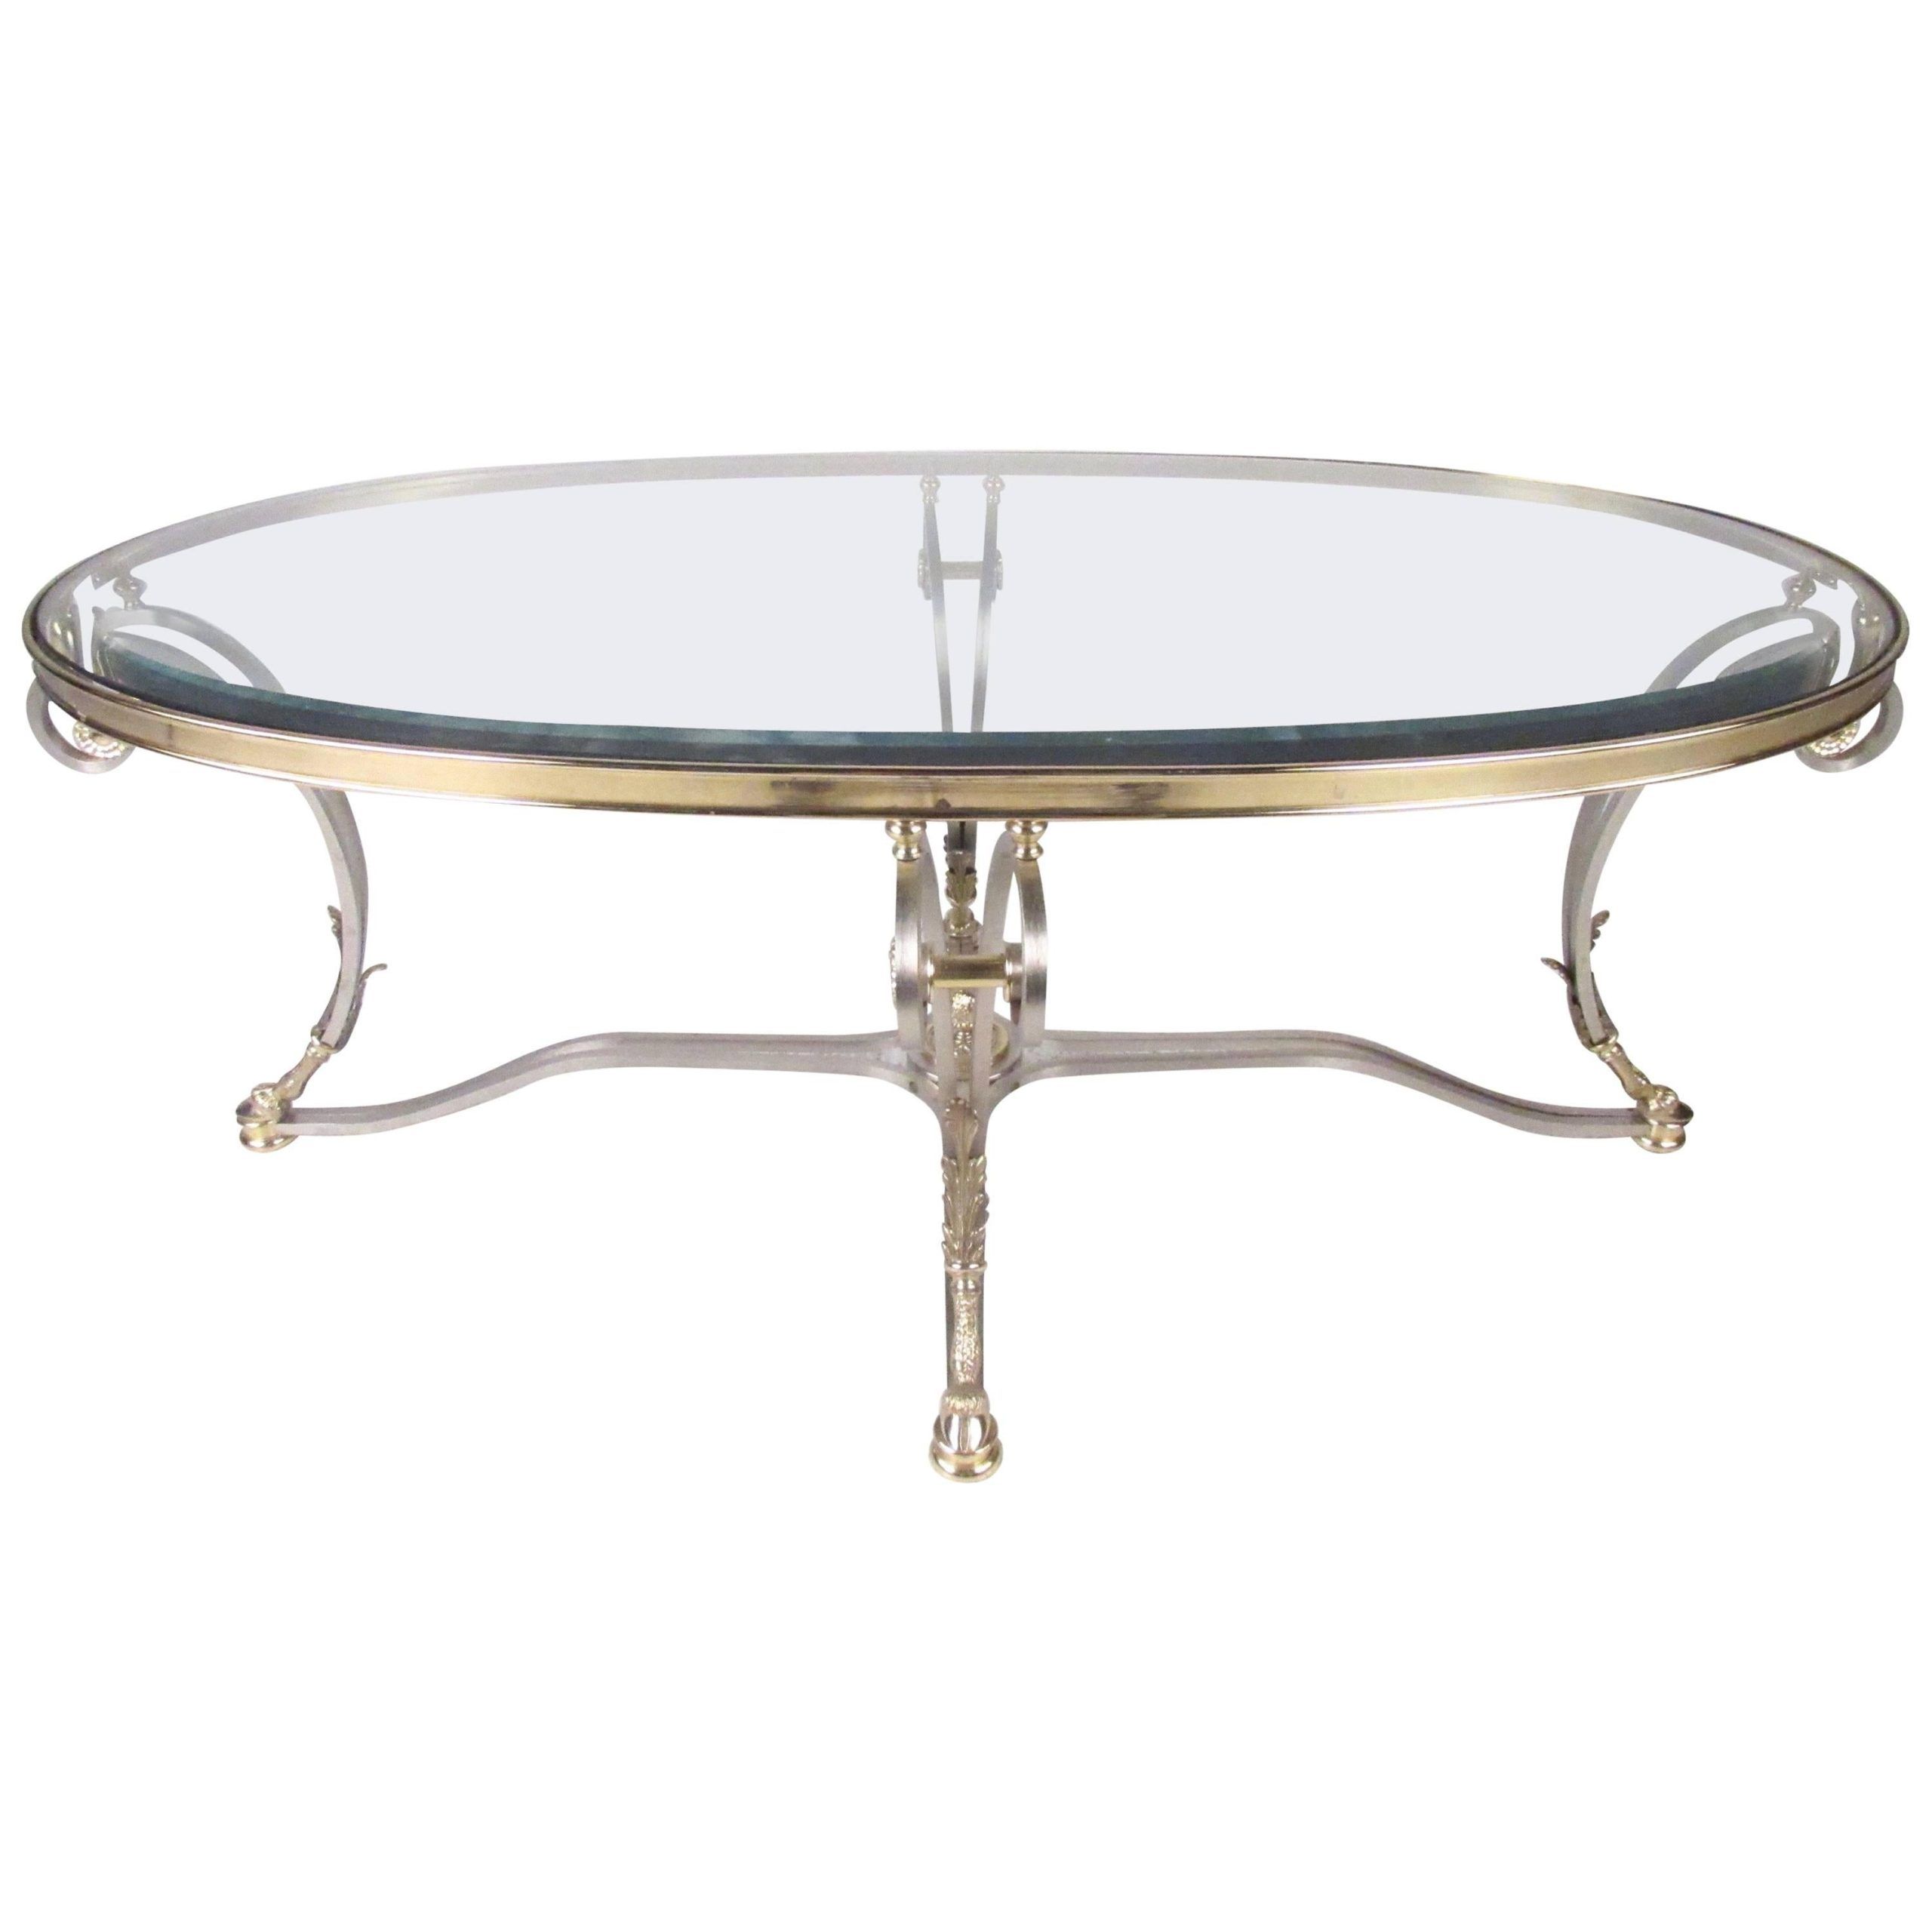 Italian Modern Brass And Steel Regency Style Coffee Table For Sale At In Regency Cain Steel Coffee Tables (View 14 of 20)